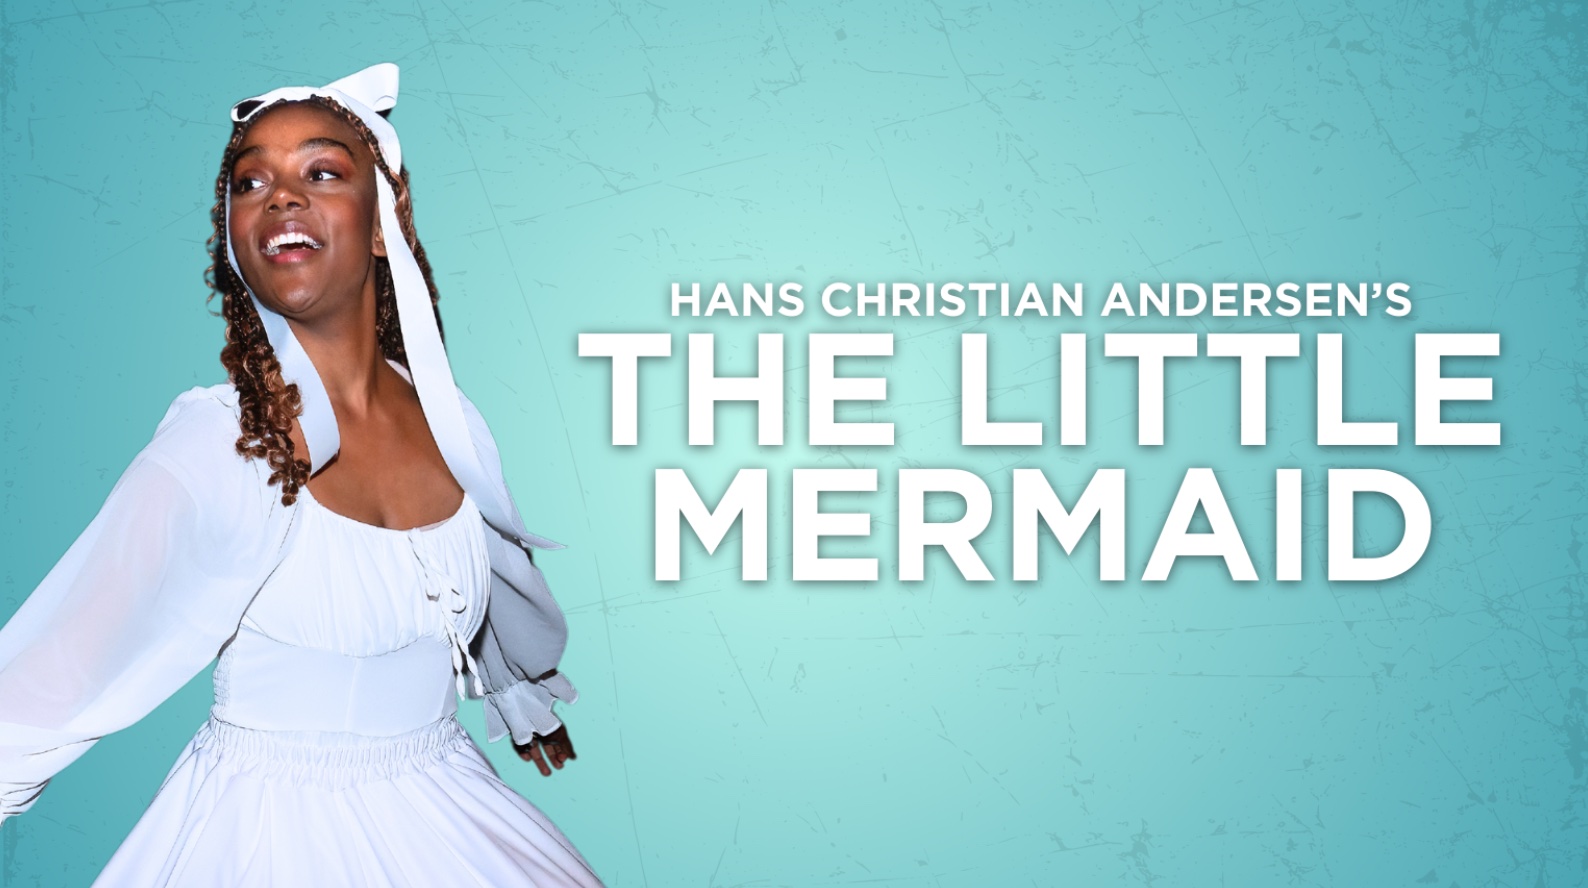 Hans Christian Andersen's THE LITTLE MERMAID by Zach Theatre